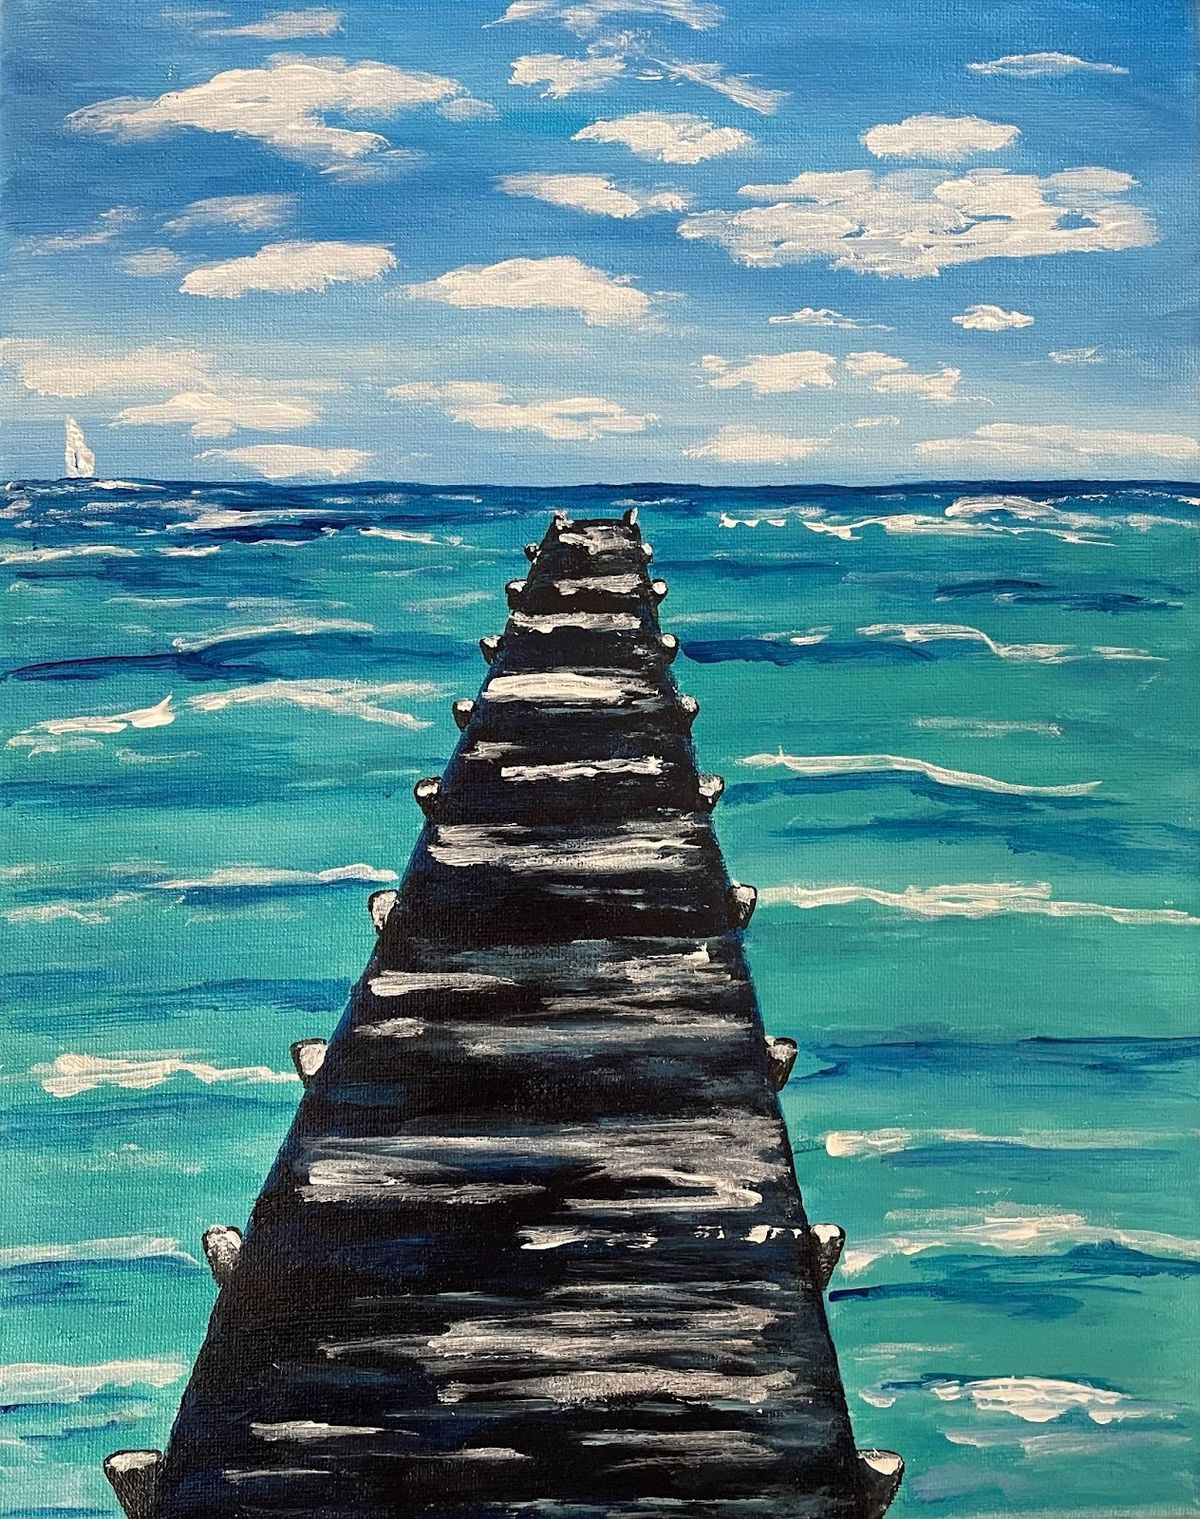  "Sittin' at the dock of the Bay" Paint Night